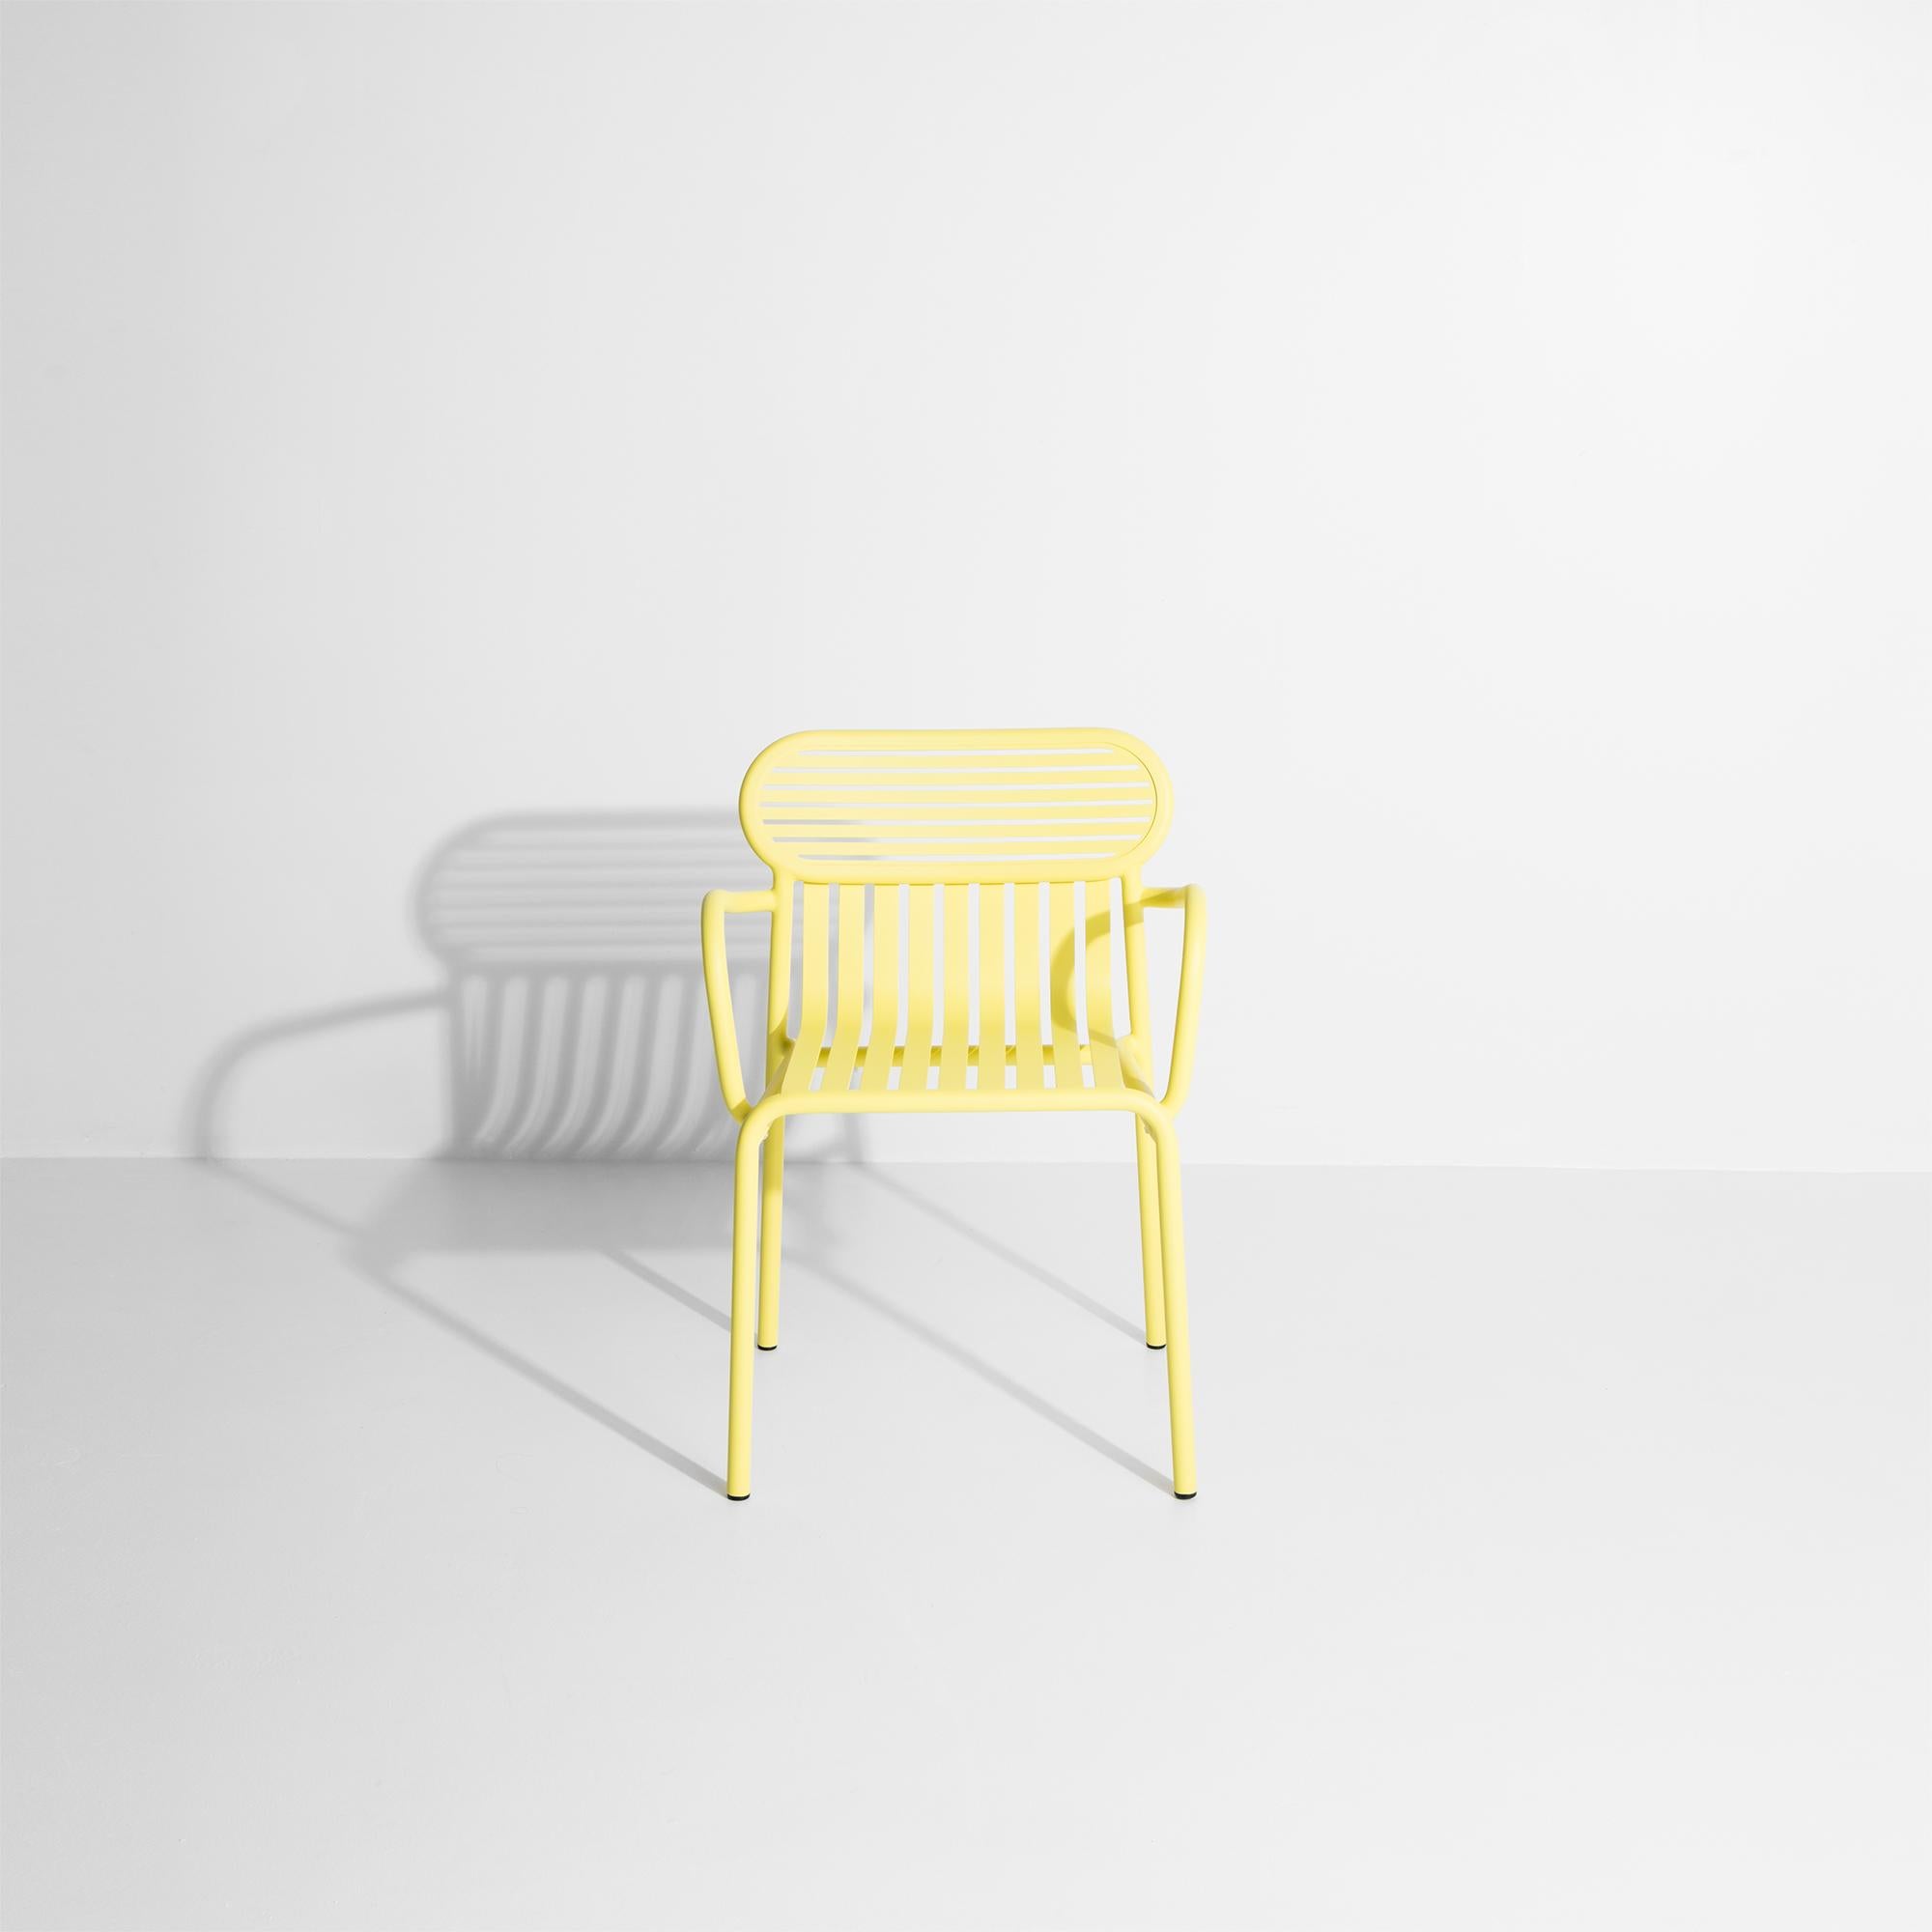 Petite Friture Week-End Bridge Chair in Yellow Aluminium, 2017 In New Condition For Sale In Brooklyn, NY